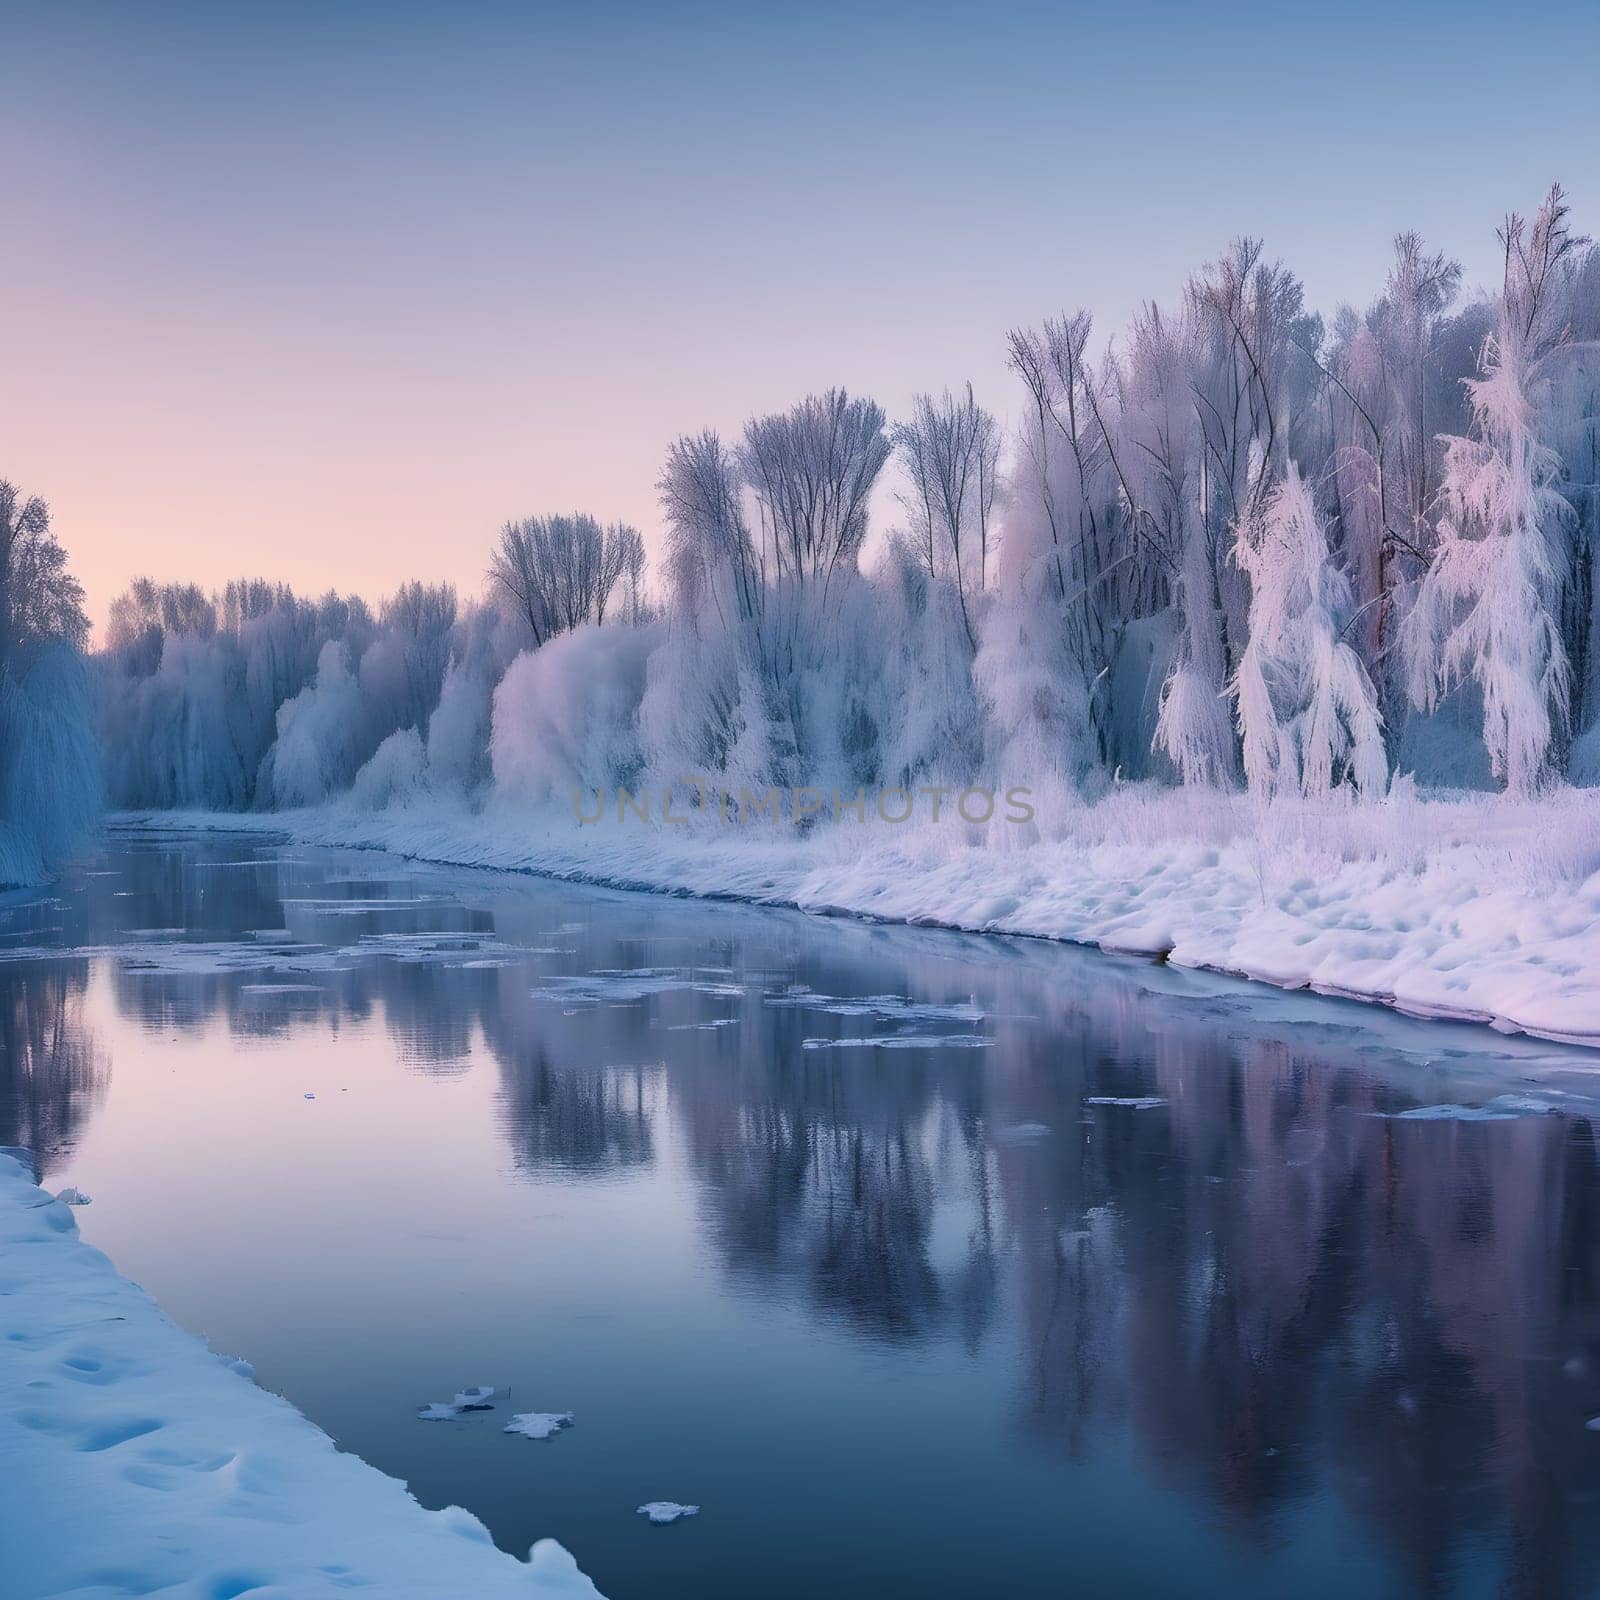 Frosty Serenity: Sunset Panorama of the Snowy Russian River and Forestscape by Petrichor